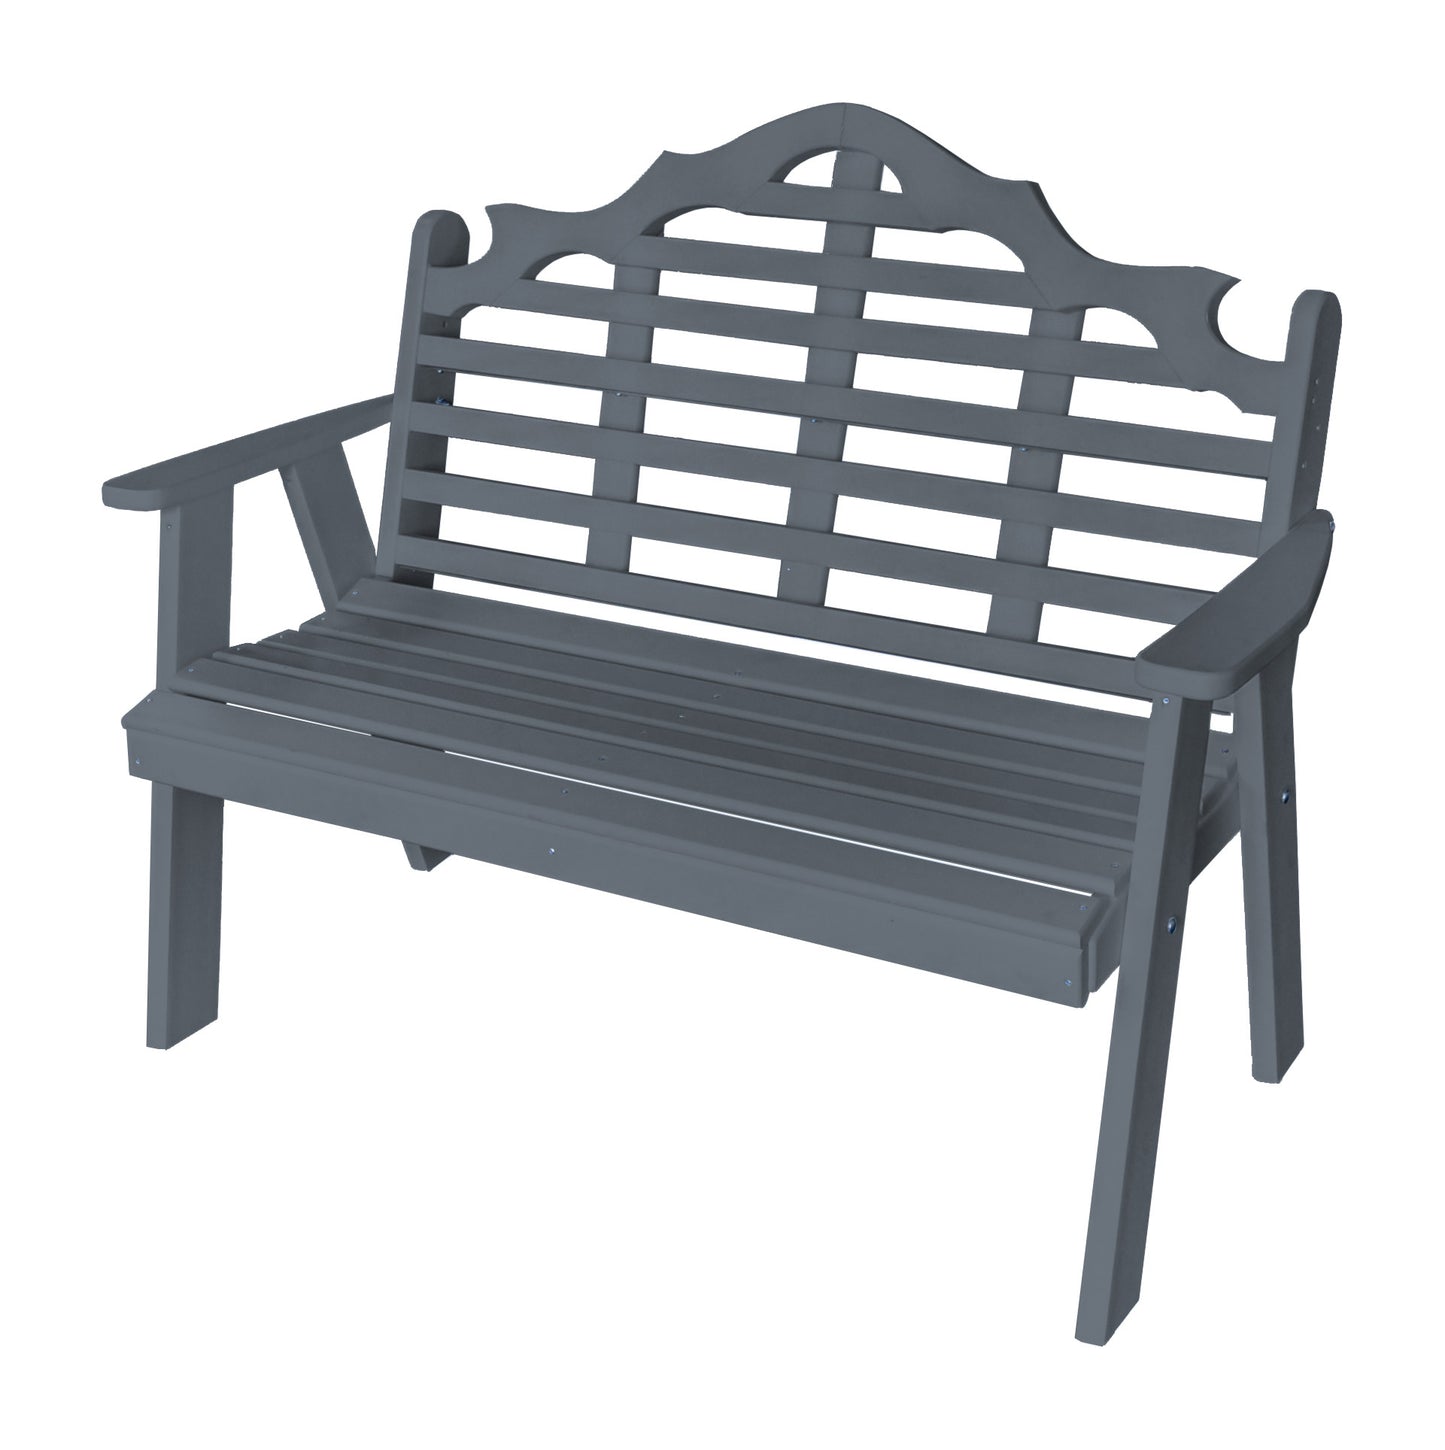 A&L Furniture Co. Poly 5' Marlboro Garden Bench - LEAD TIME TO SHIP 10 BUSINESS DAYS